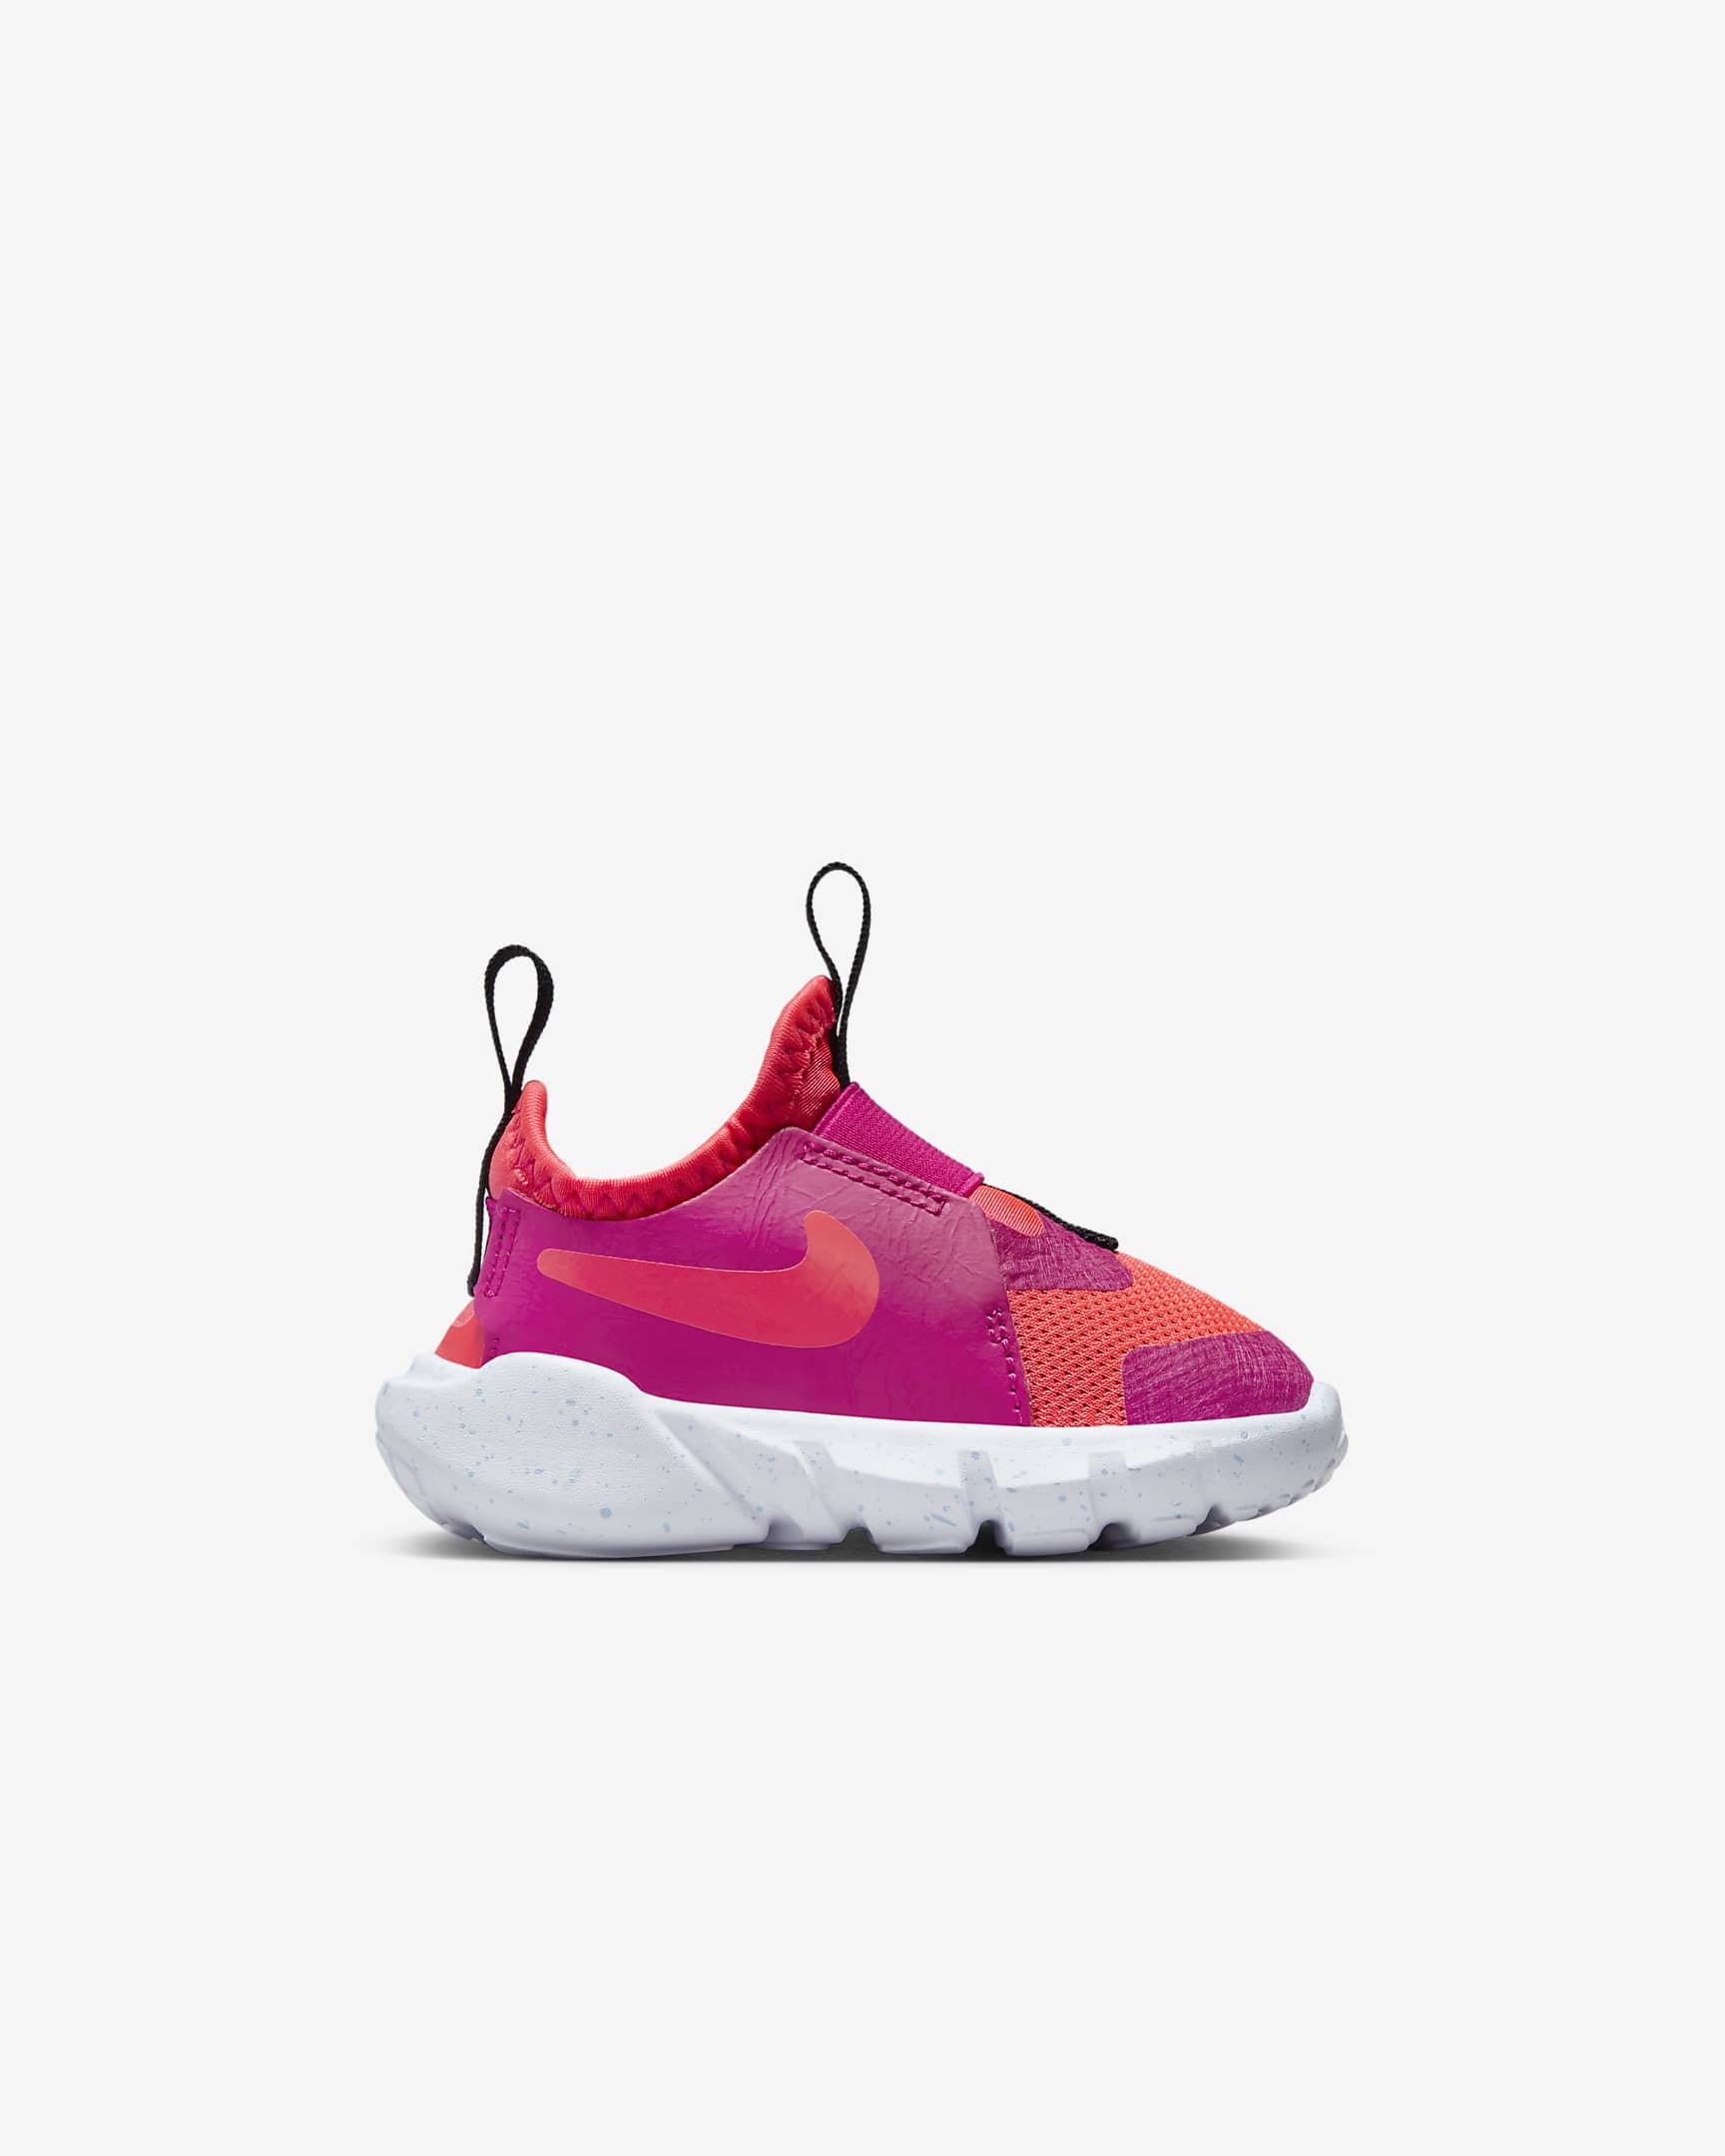 Nike Flex Runner 2 Baby/Toddler Shoes. Nike IL